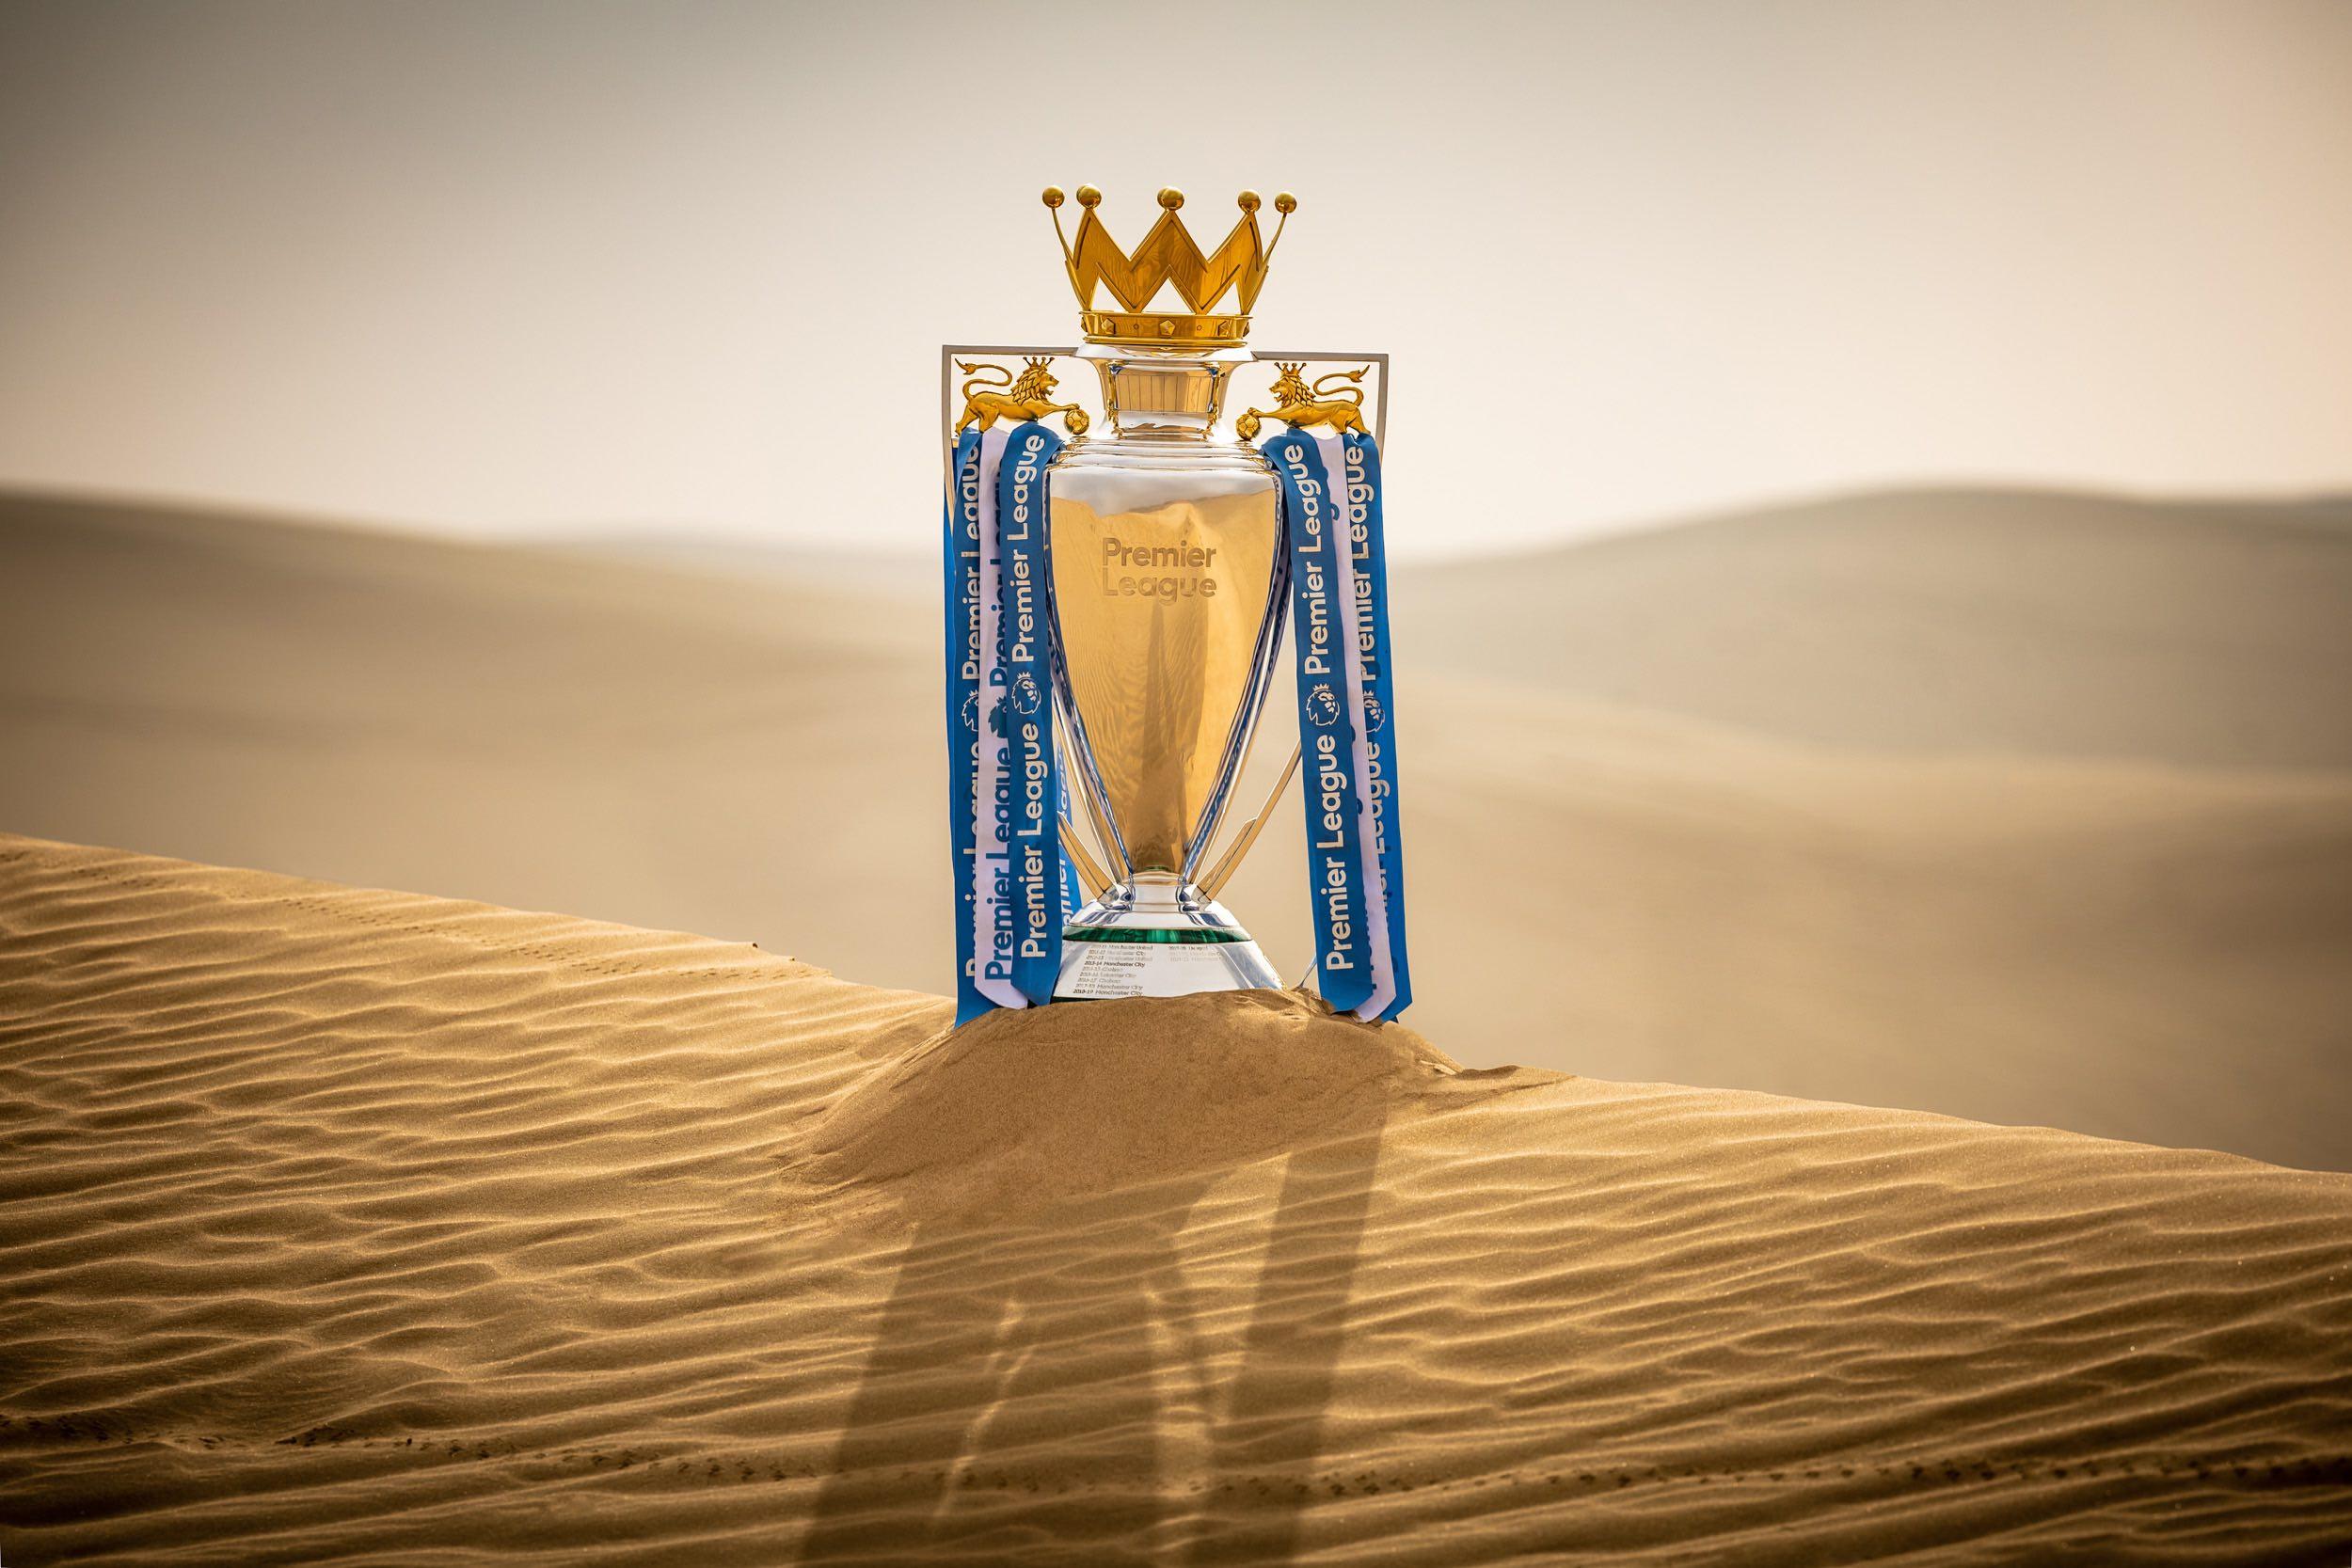 The Manchester City Treble Trophy Tour heads to Abu Dhabi